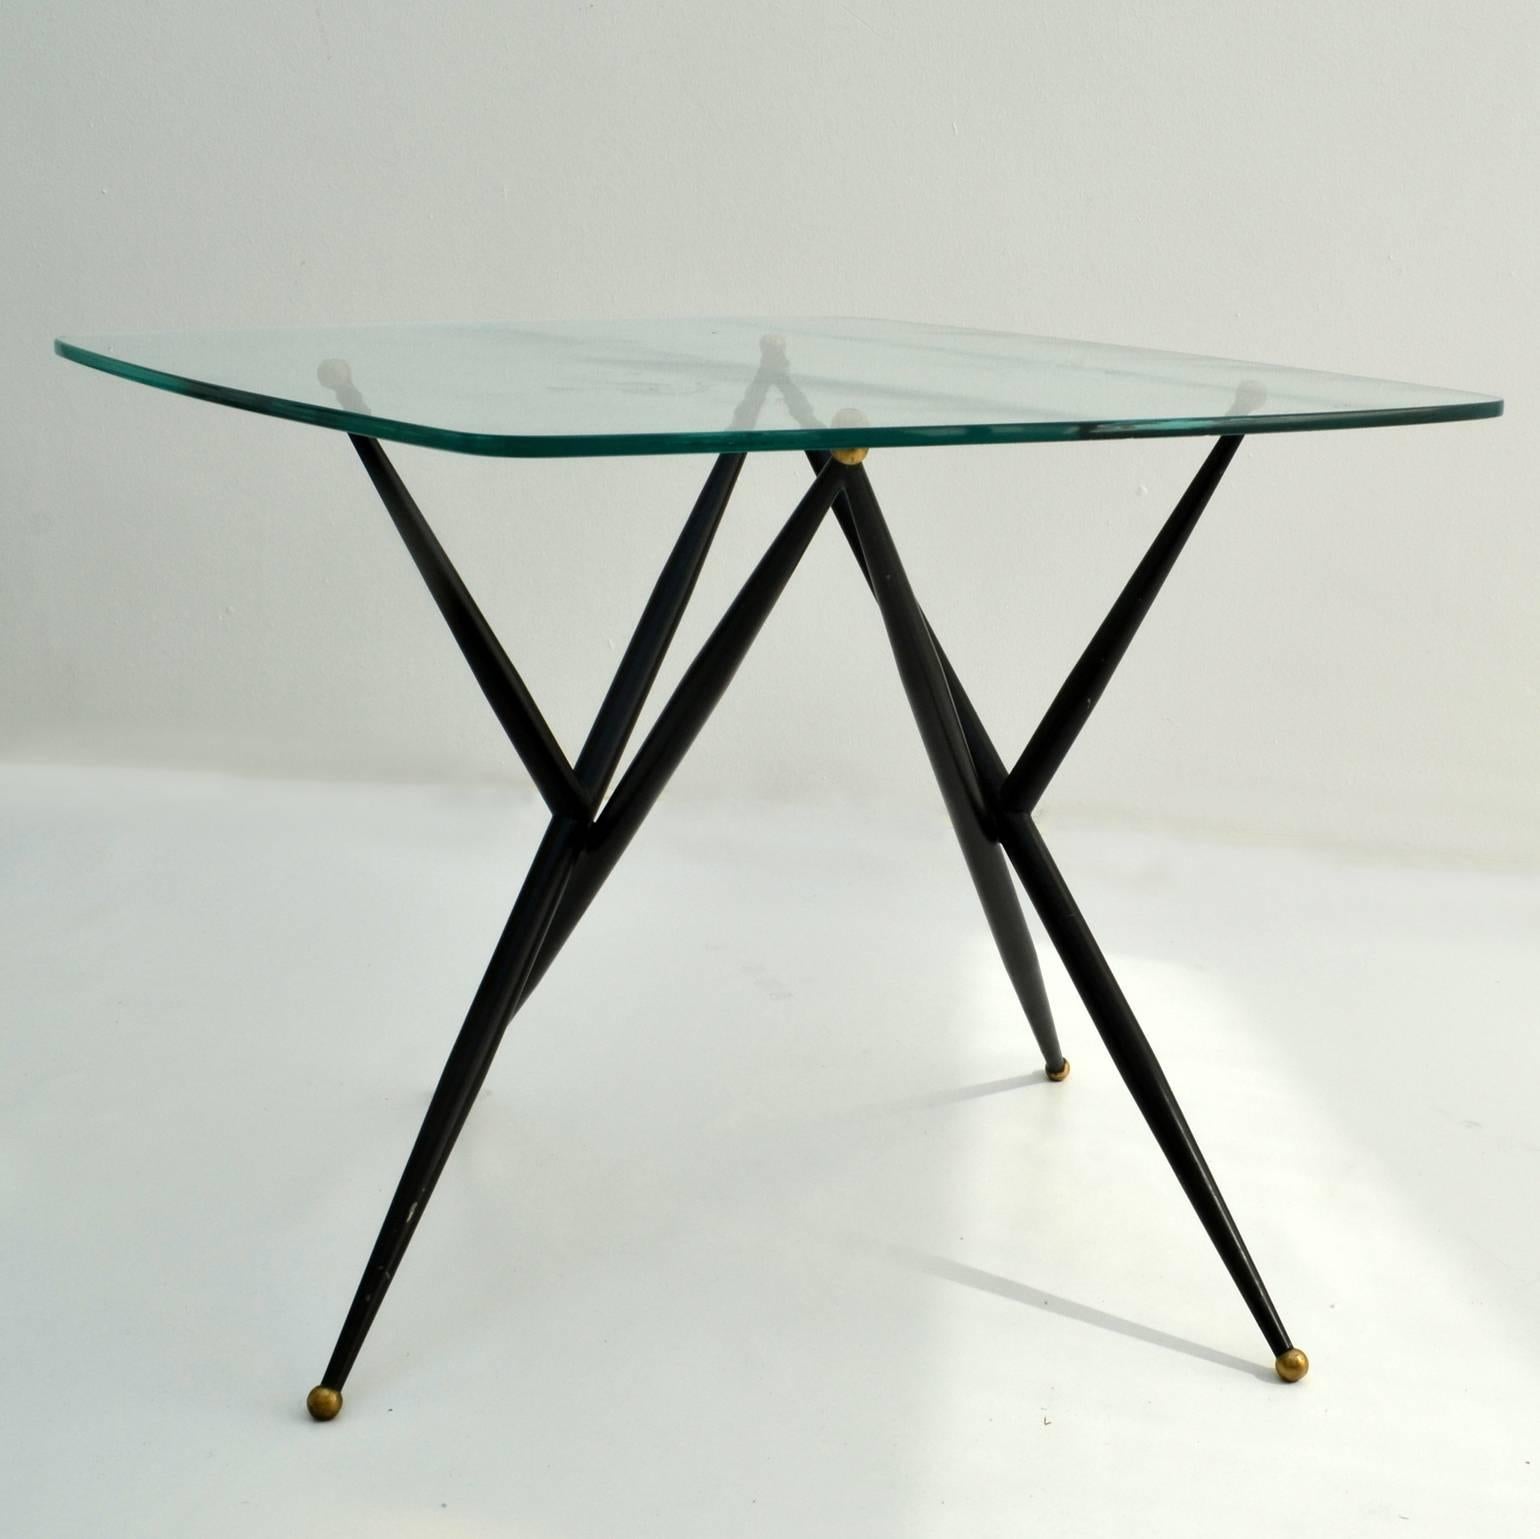 20th Century Italian Etched Glass Top Coffee Table on Black Metal Leg